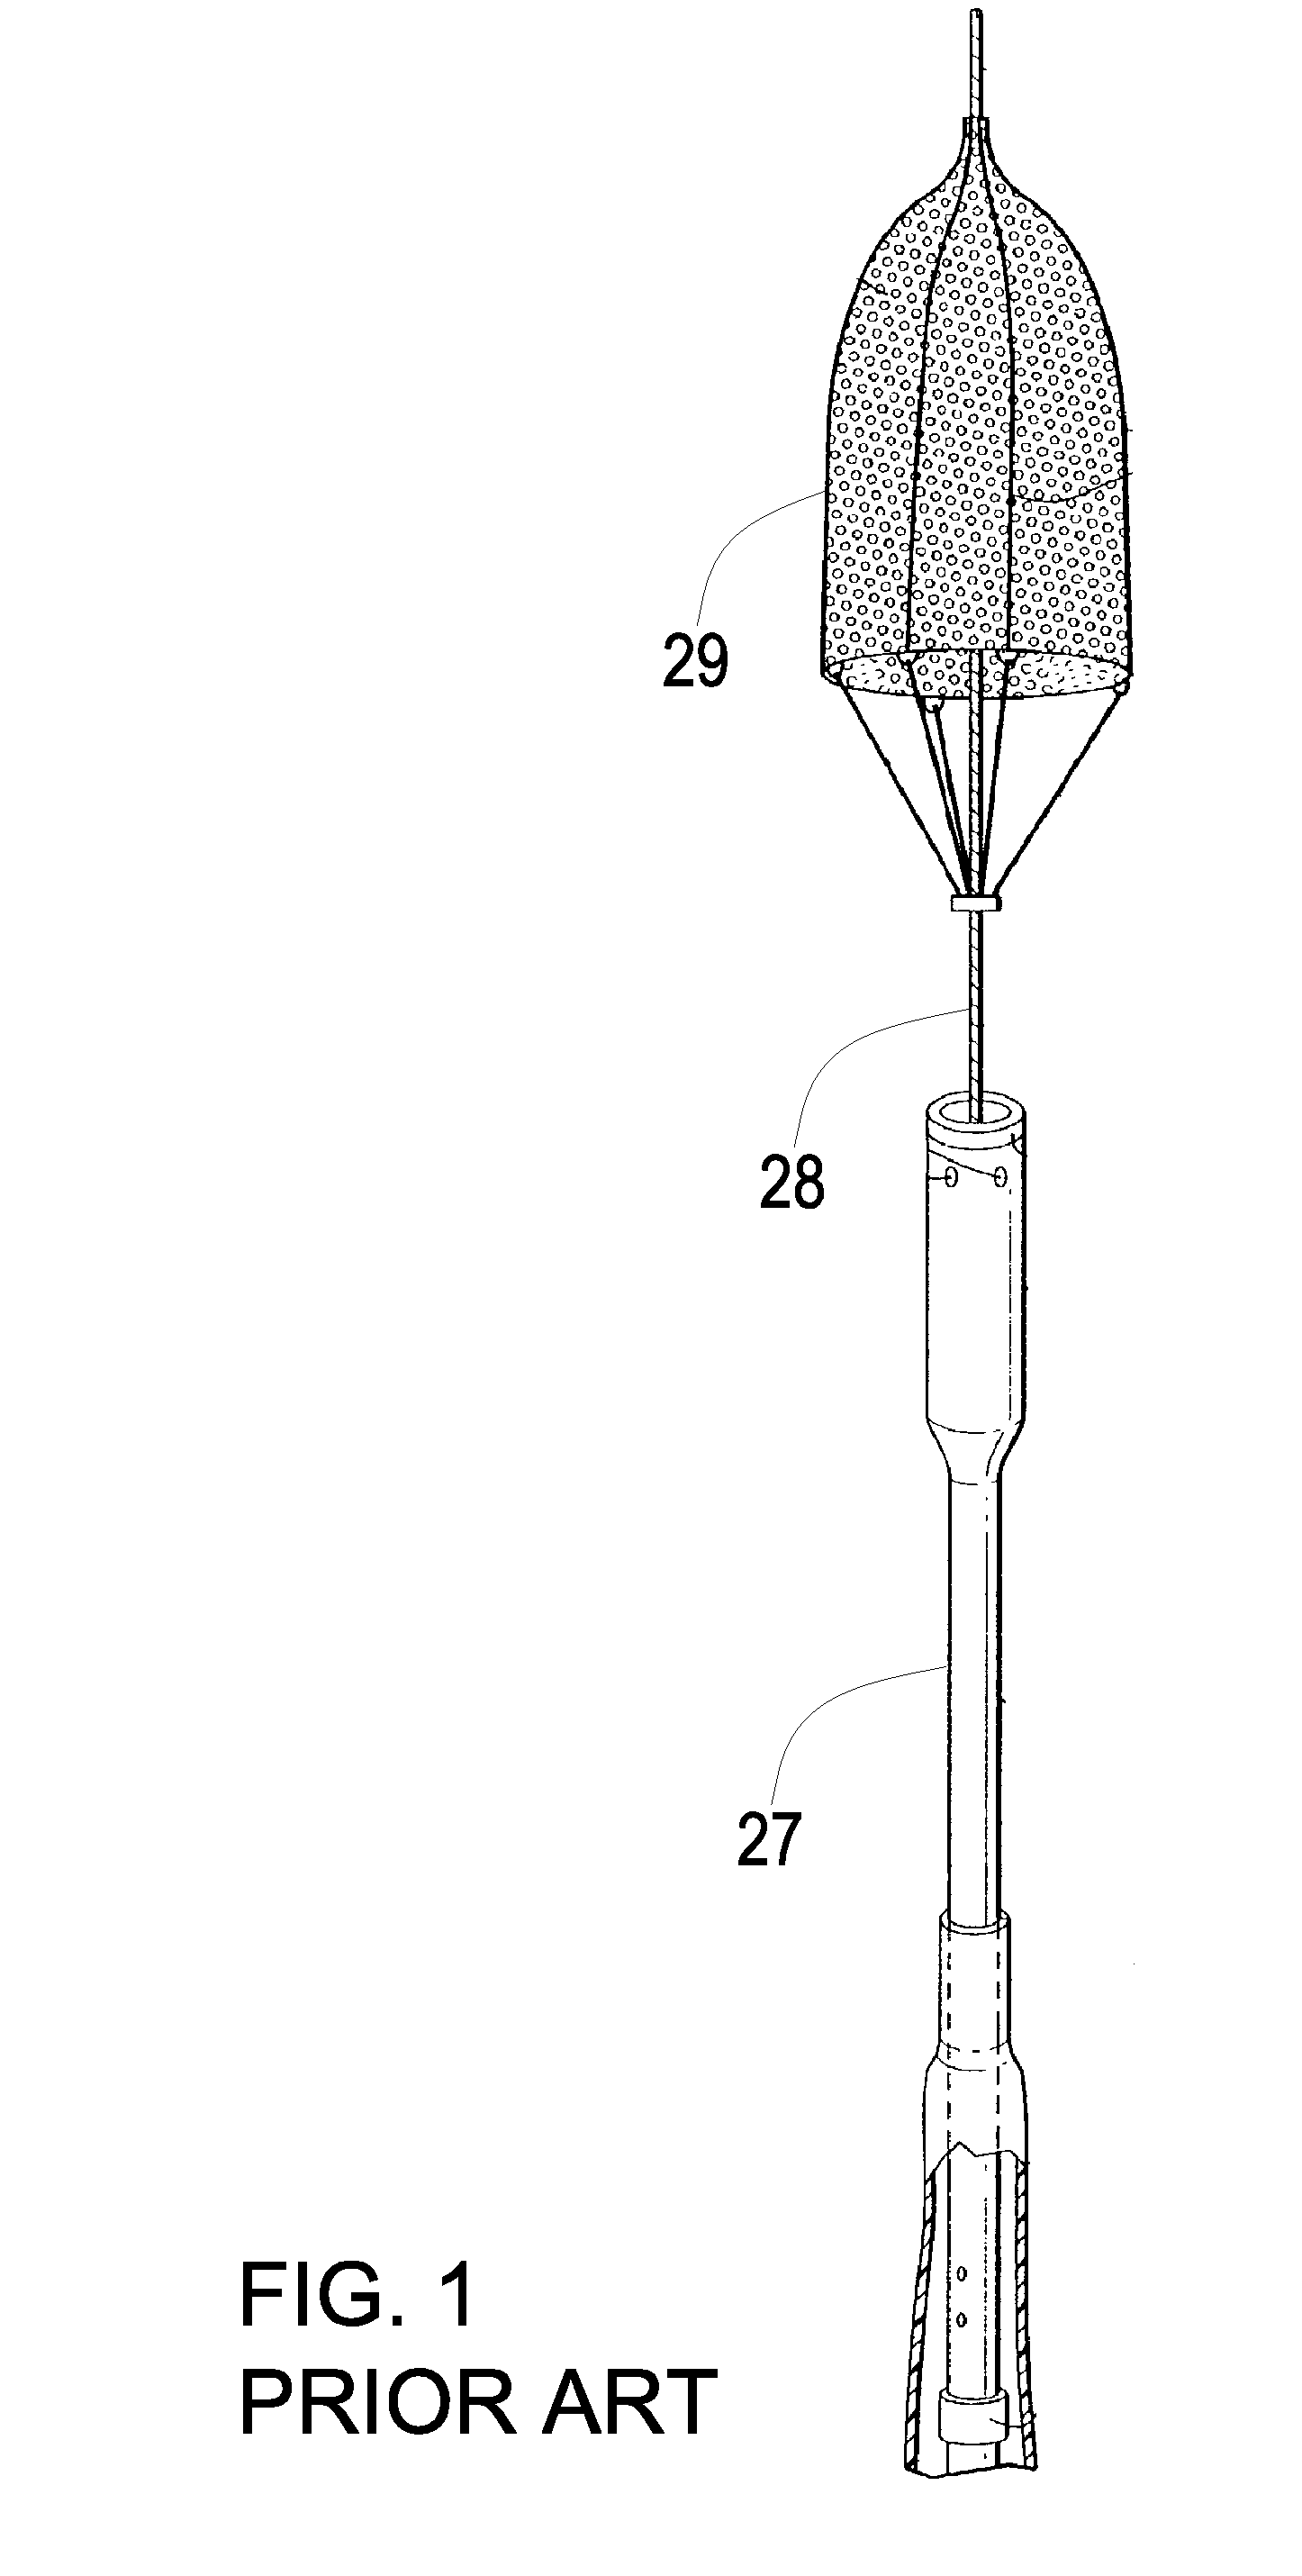 Integrated distal embolization protection apparatus for endo-luminal devices such as balloon, stent or tavi apparatus